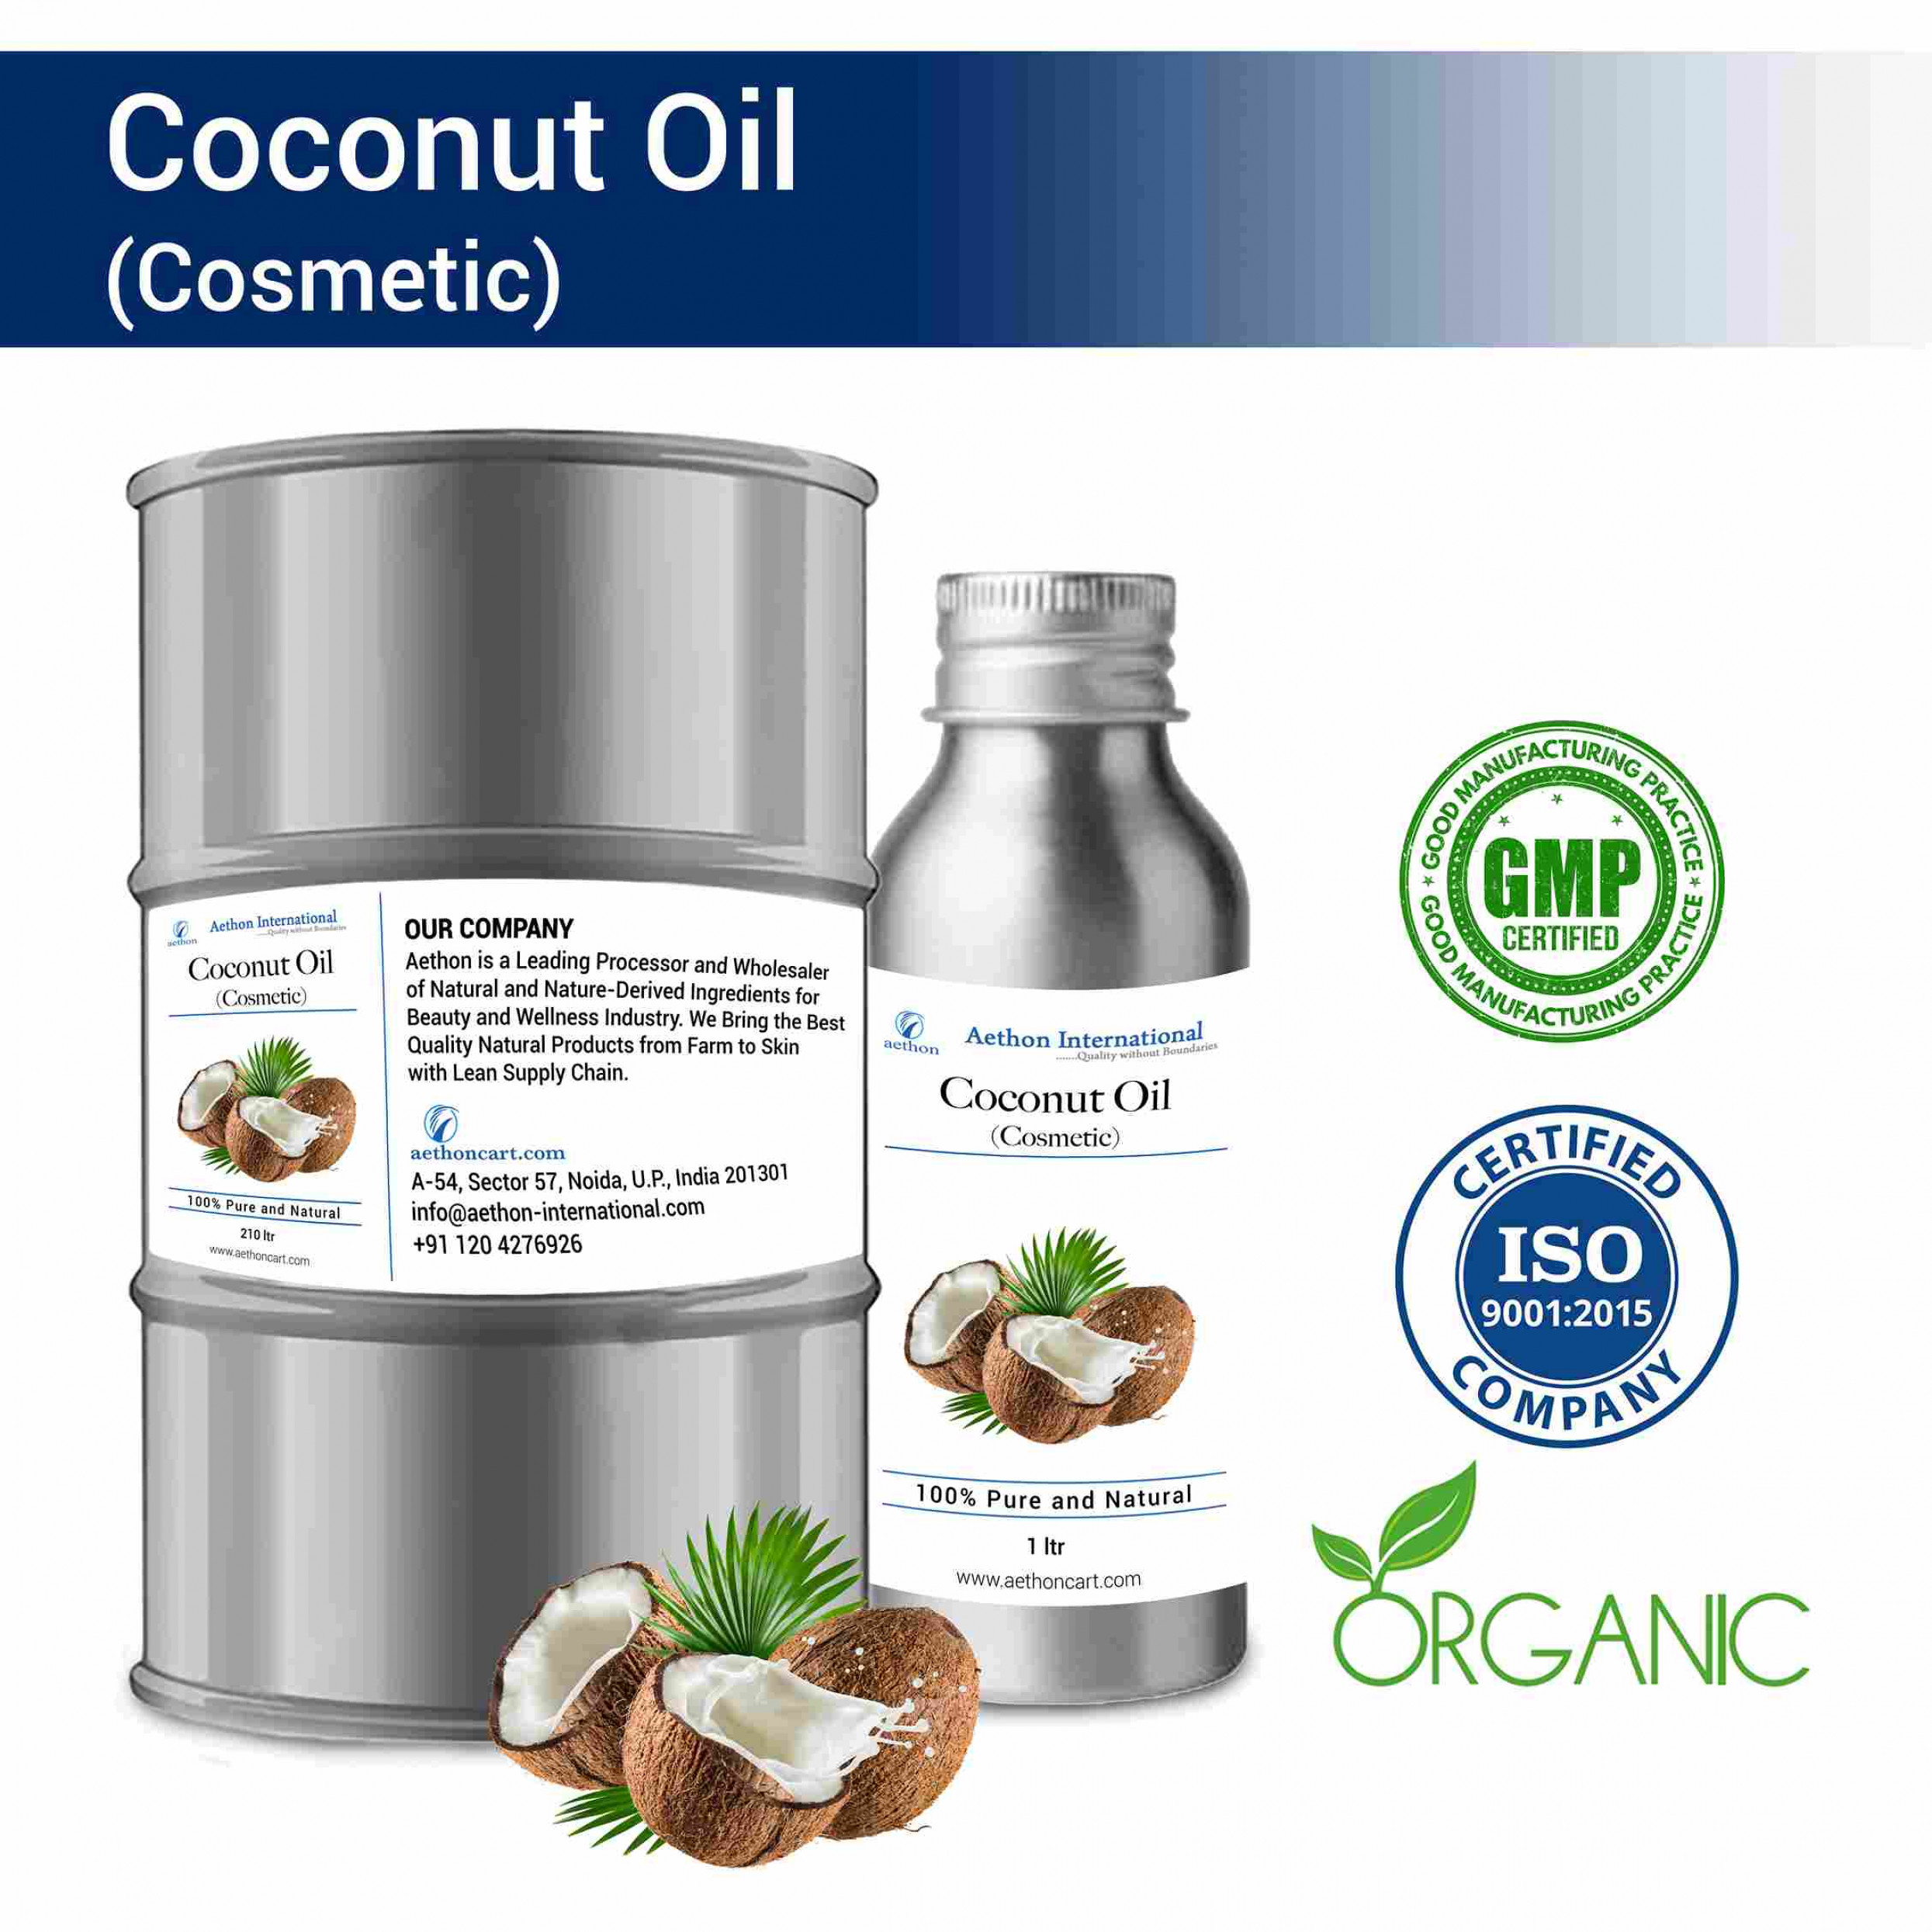 Coconut Oil (Cosmetic) - RBD